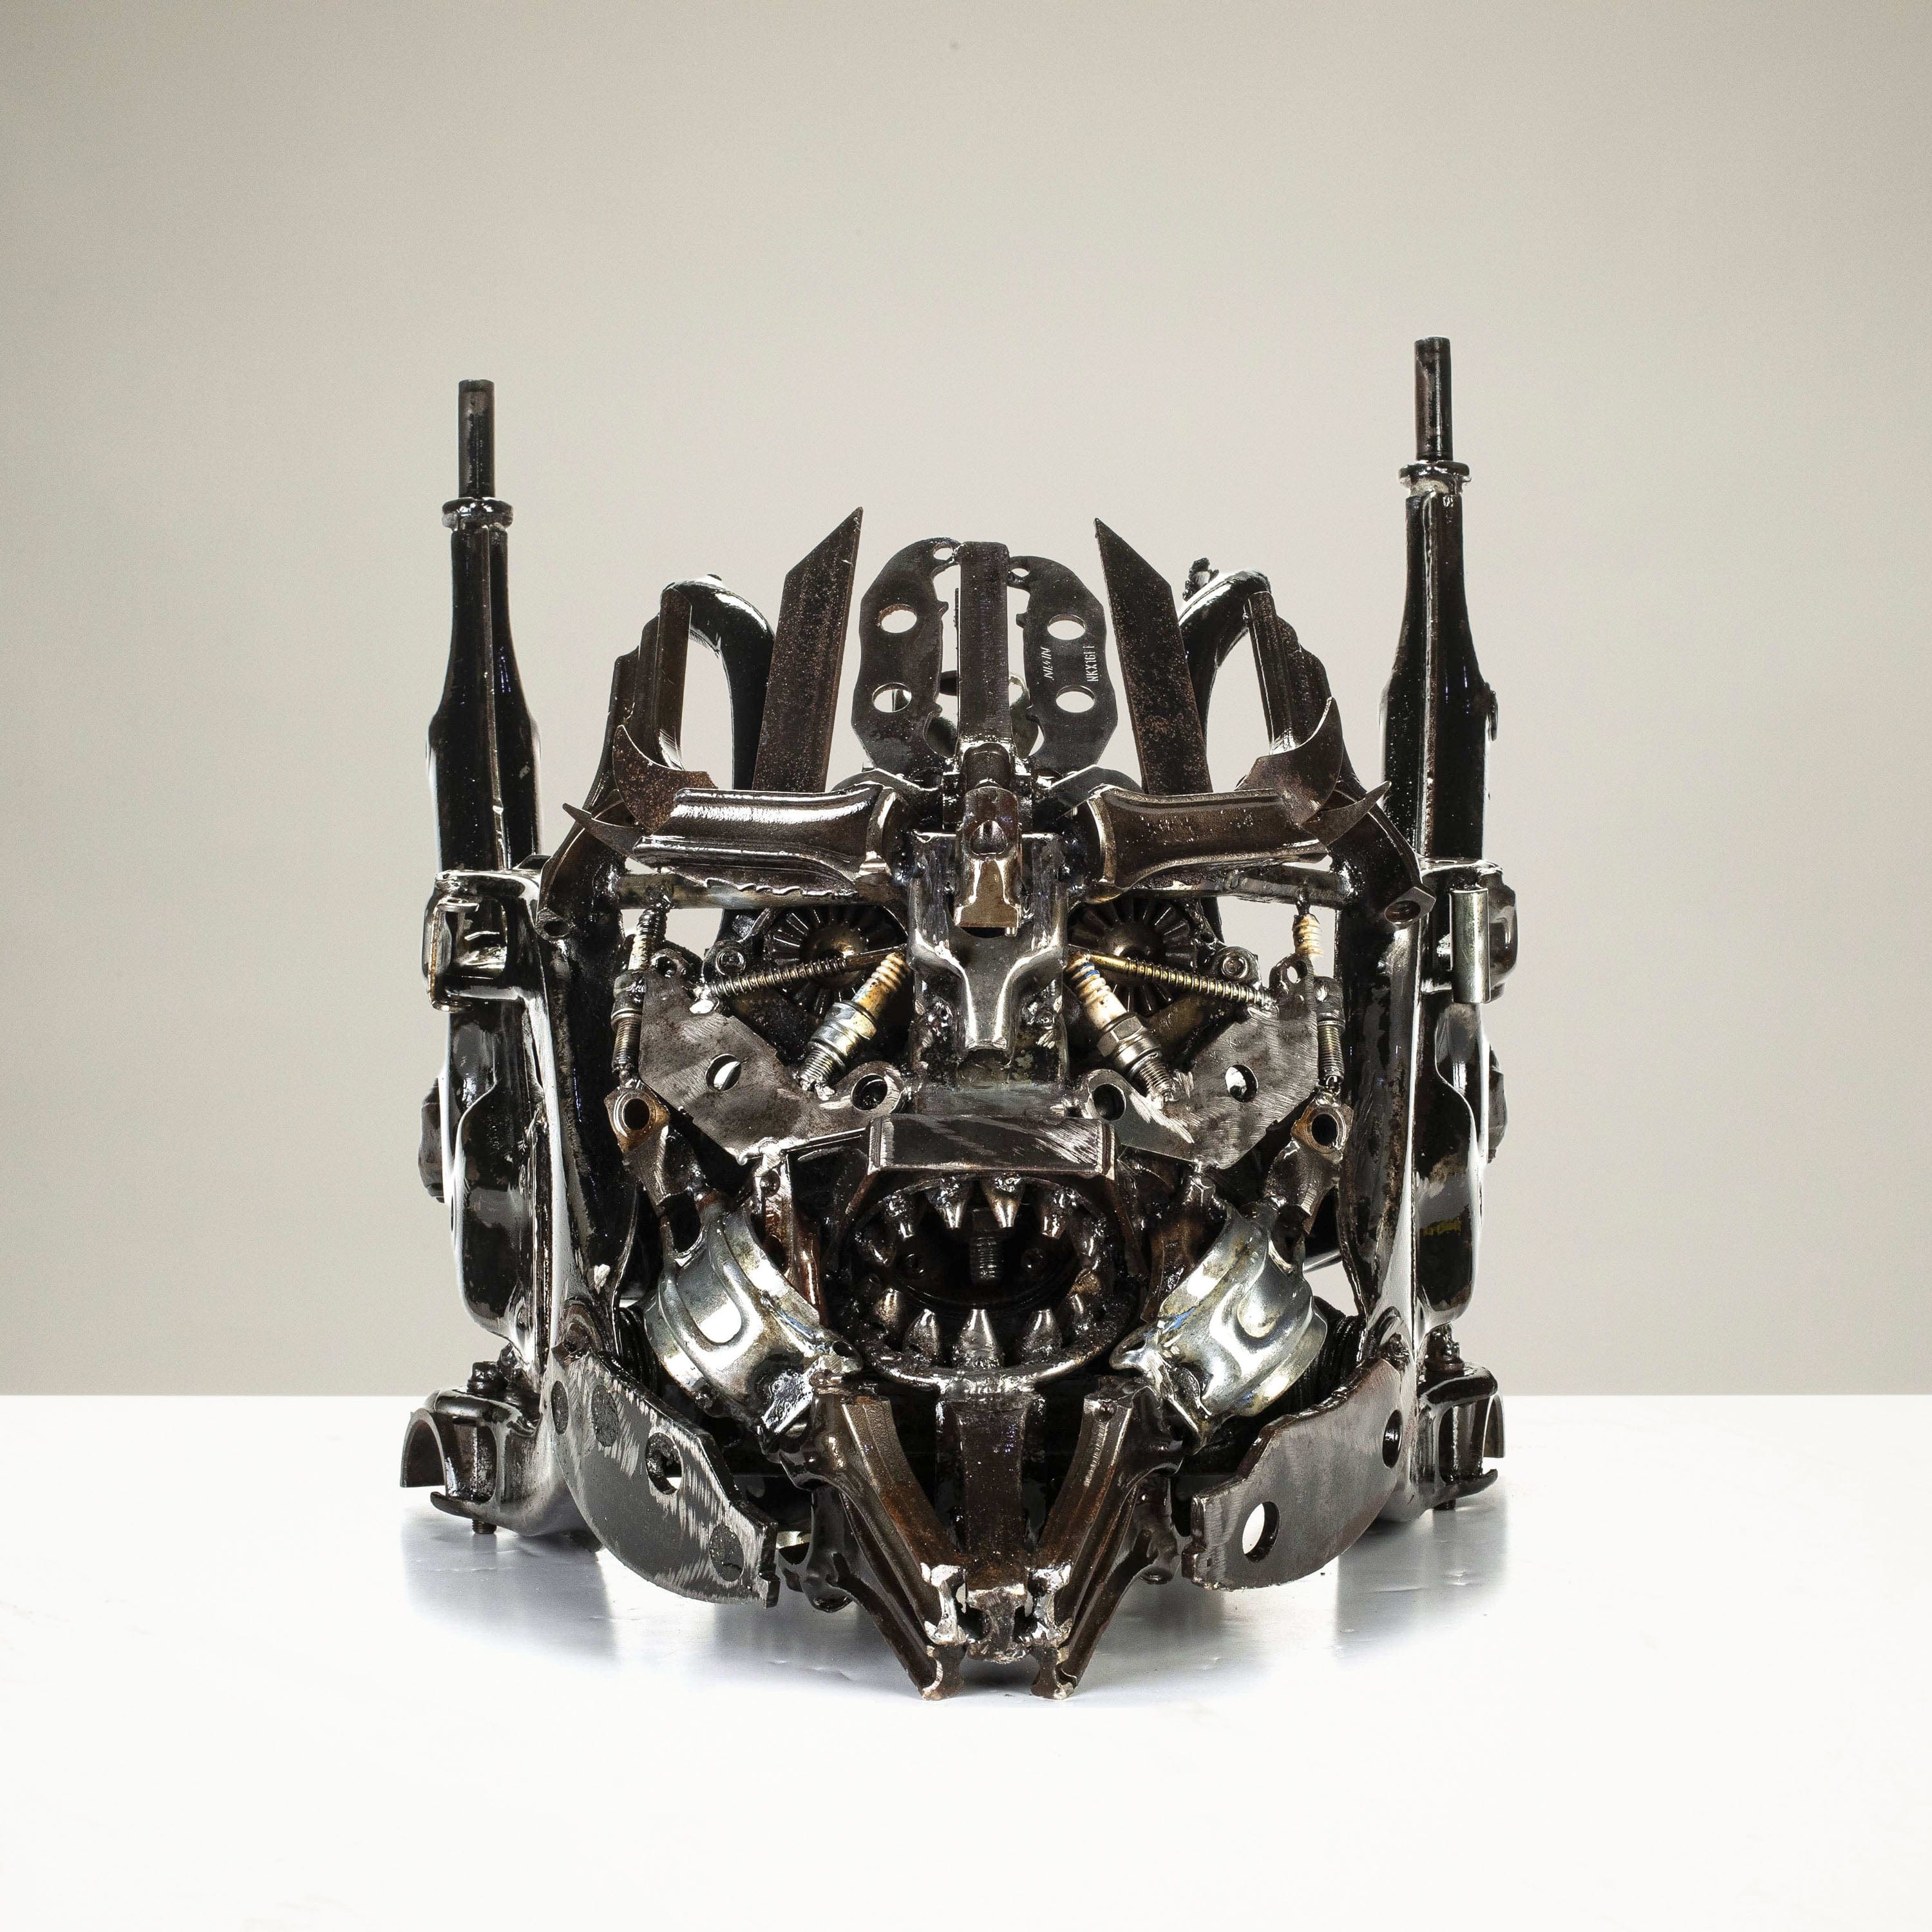 Kalifano Recycled Metal Art Megatron Head Inspired Recycled Metal Art Sculpture RMS-HEAD-M